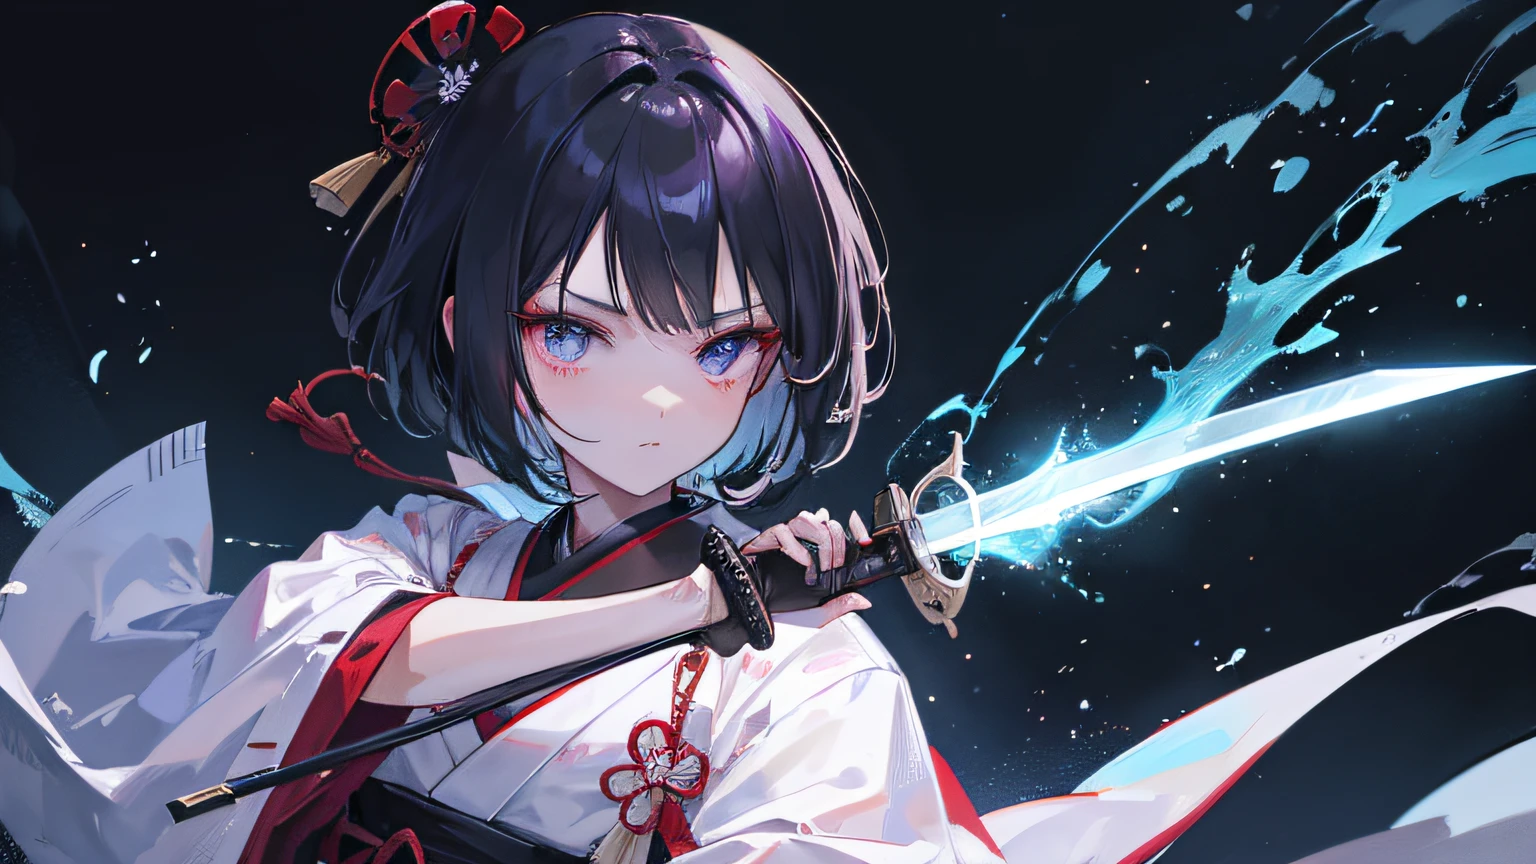 a Japan samurai, short black hair. he is a righteous samurai who fight evil. he wear white and black kimono. he hold a sword with flames coming out from his sword. the background is in the forest. Masterpiece, high-resolution, detailed eyes, purple eye color. The background is a swirling blue flame in Katsushika Hokusai style. ray tracing, dynamic lighting.